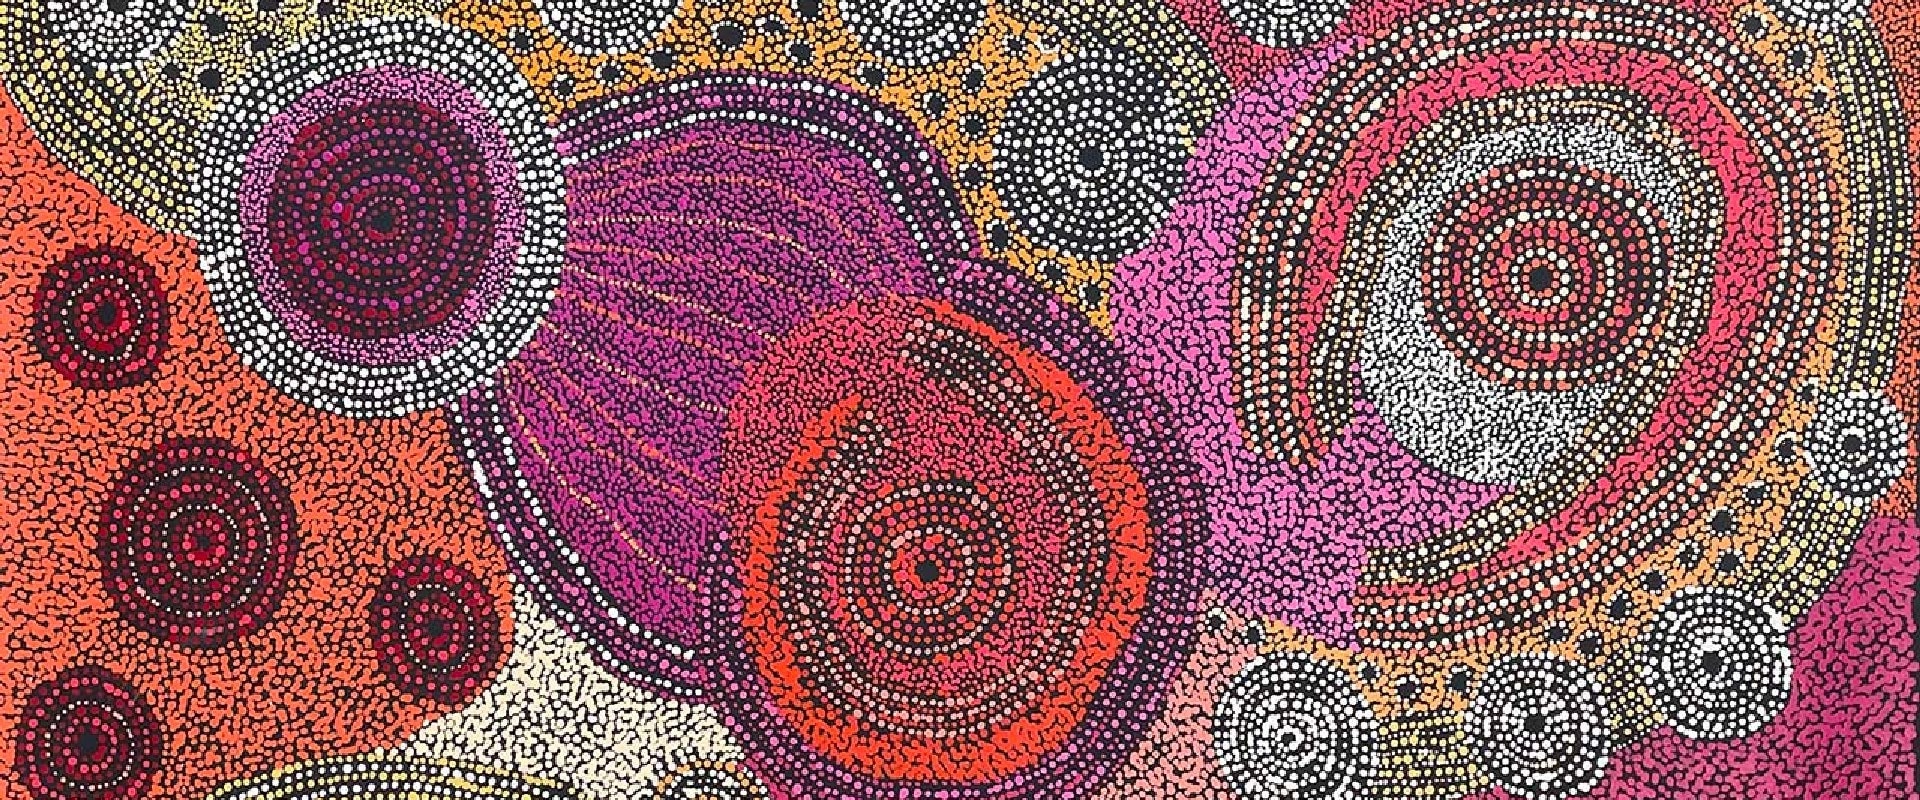 The Rich History and Beauty of Aboriginal Art and Culture